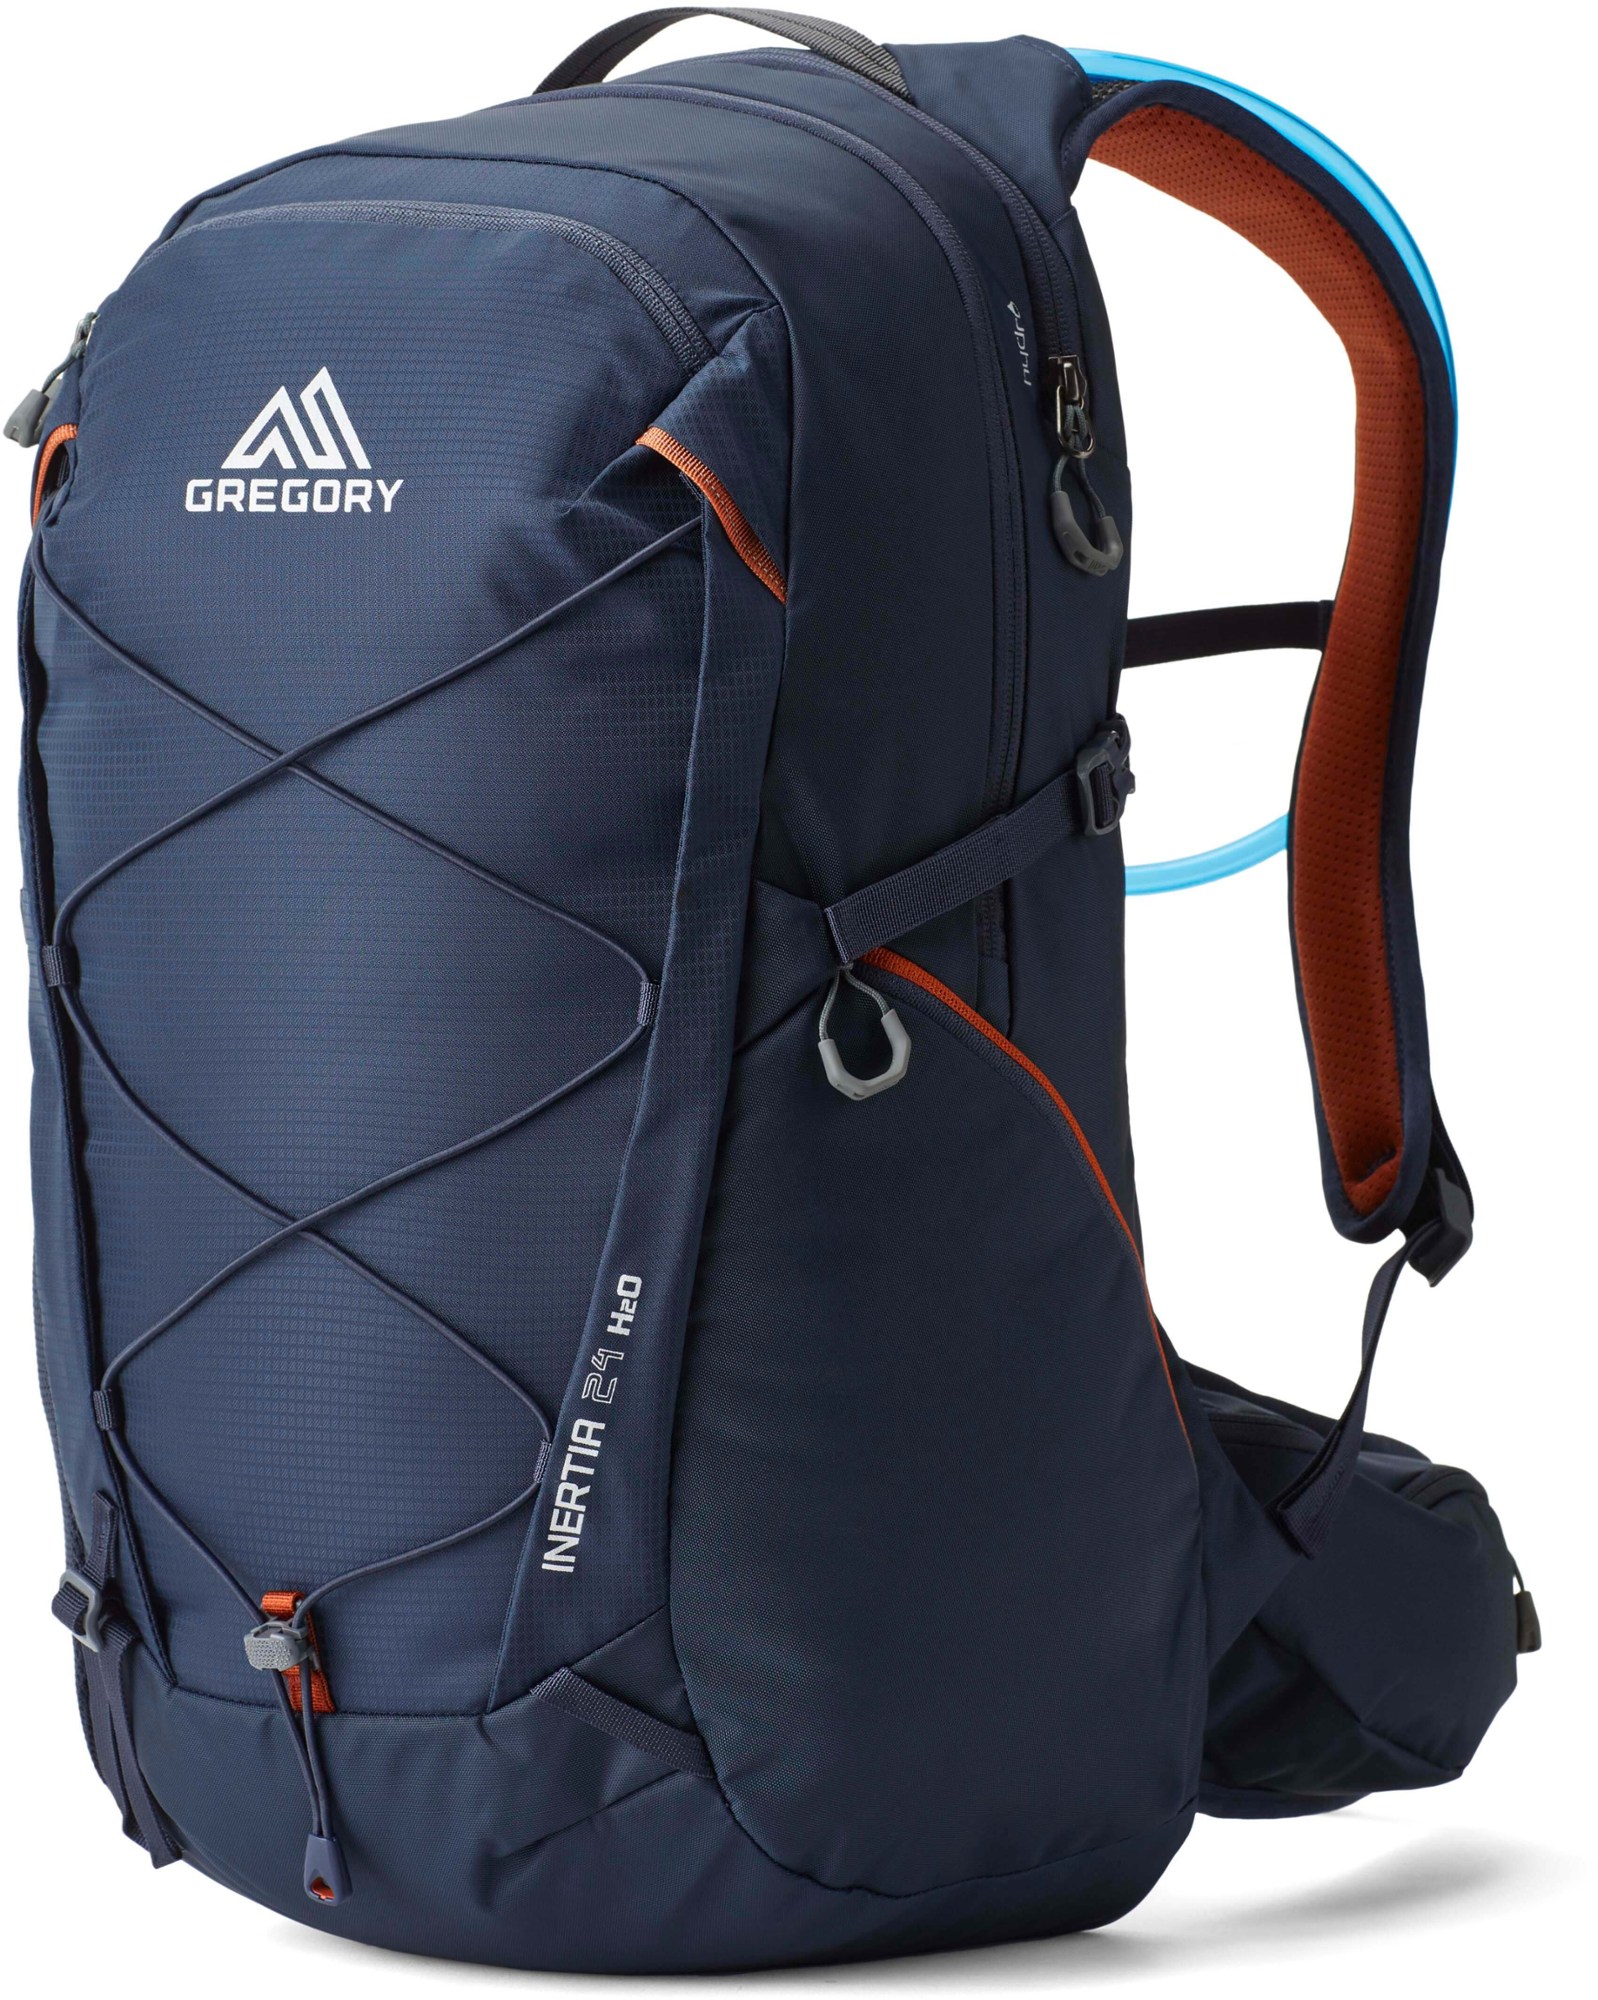 Gregory Inertia 24 H20 hydration pack